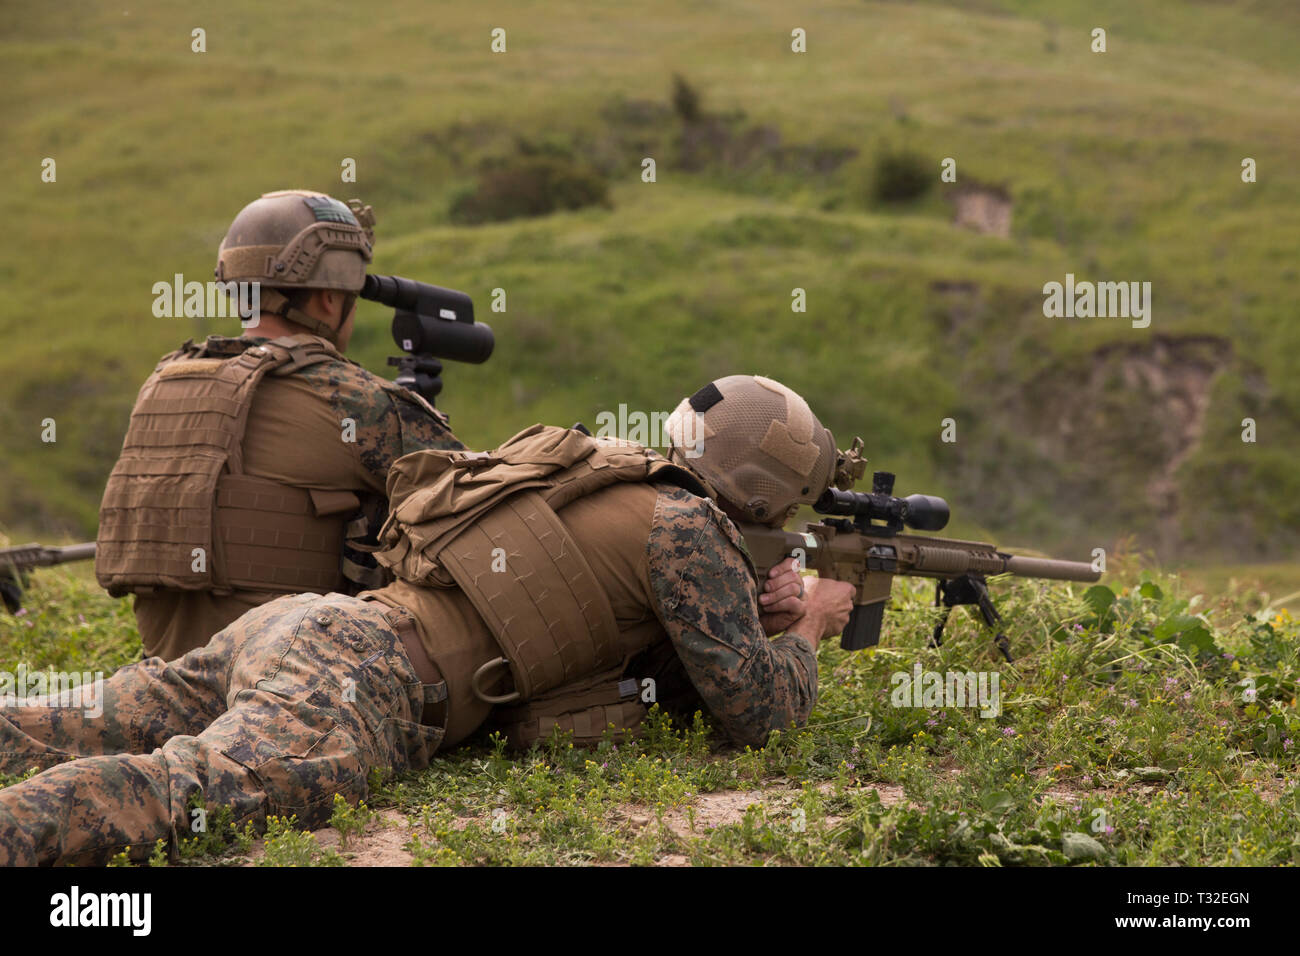 U.S. Marines conduct an unknown-distance range during the 2019 West Coast Explosive Ordnance Disposal Team Competition at Marine Corps Base Camp Pendleton, California, March 26, 2019. The competition consisted of 12 events all based on a point system in which a team could earn up to 200 points, the team who accumulated the most points at the end of the event would become the first team to win this competition. (U.S. Marine Corps photo by Cpl. Quentarius Johnson) Stock Photo